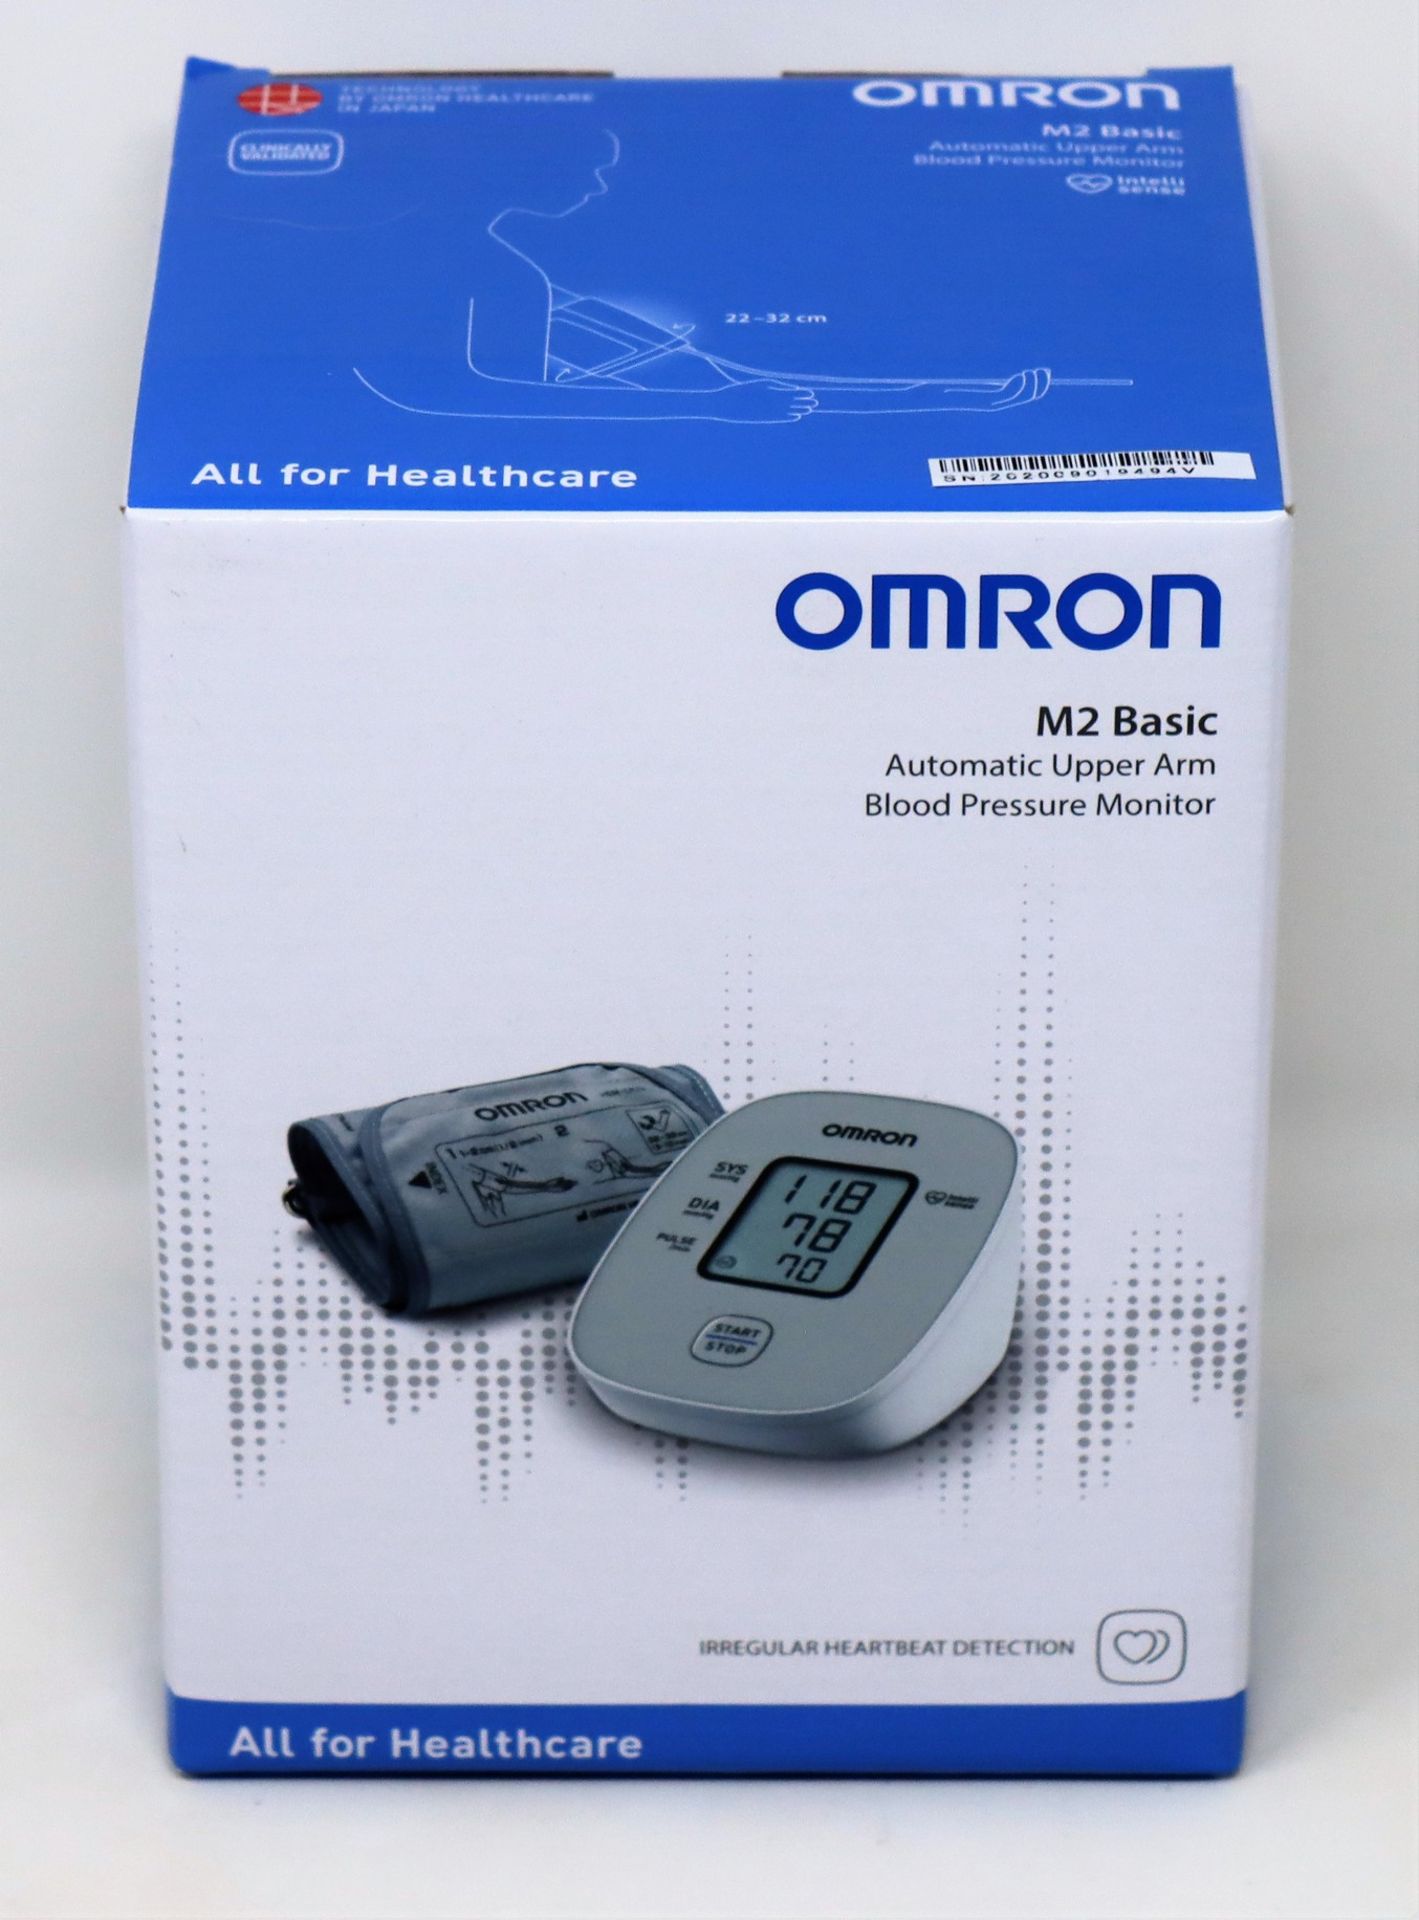 A boxed as new M2 Basic Automatic Upper Arm Blood Pressure Monitor.